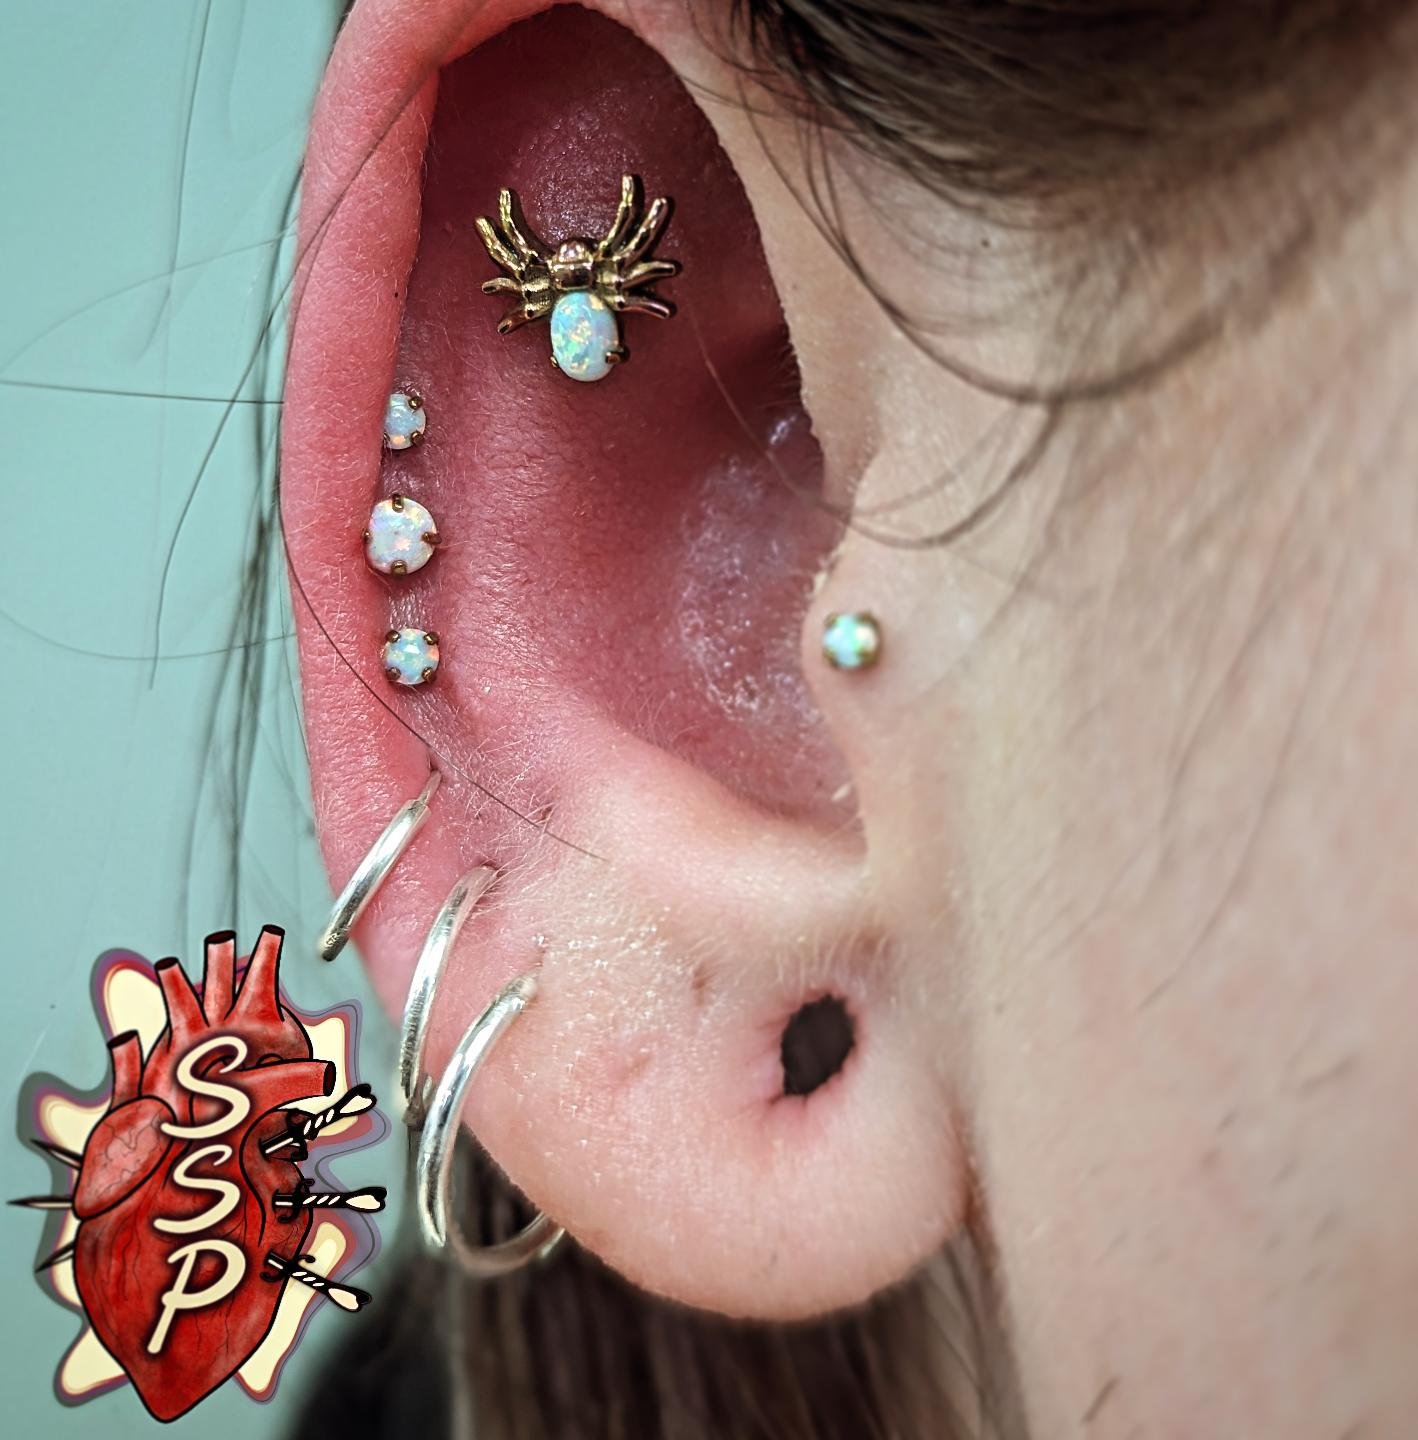 Triple midway helix piercing with 2 small and 1 medium opal pieces. Goes great with the spider and tragus we did the week before. Just a few more to finish off this ear 🖤😍

If you're interested in coming in for a piercing. There is no appointment n